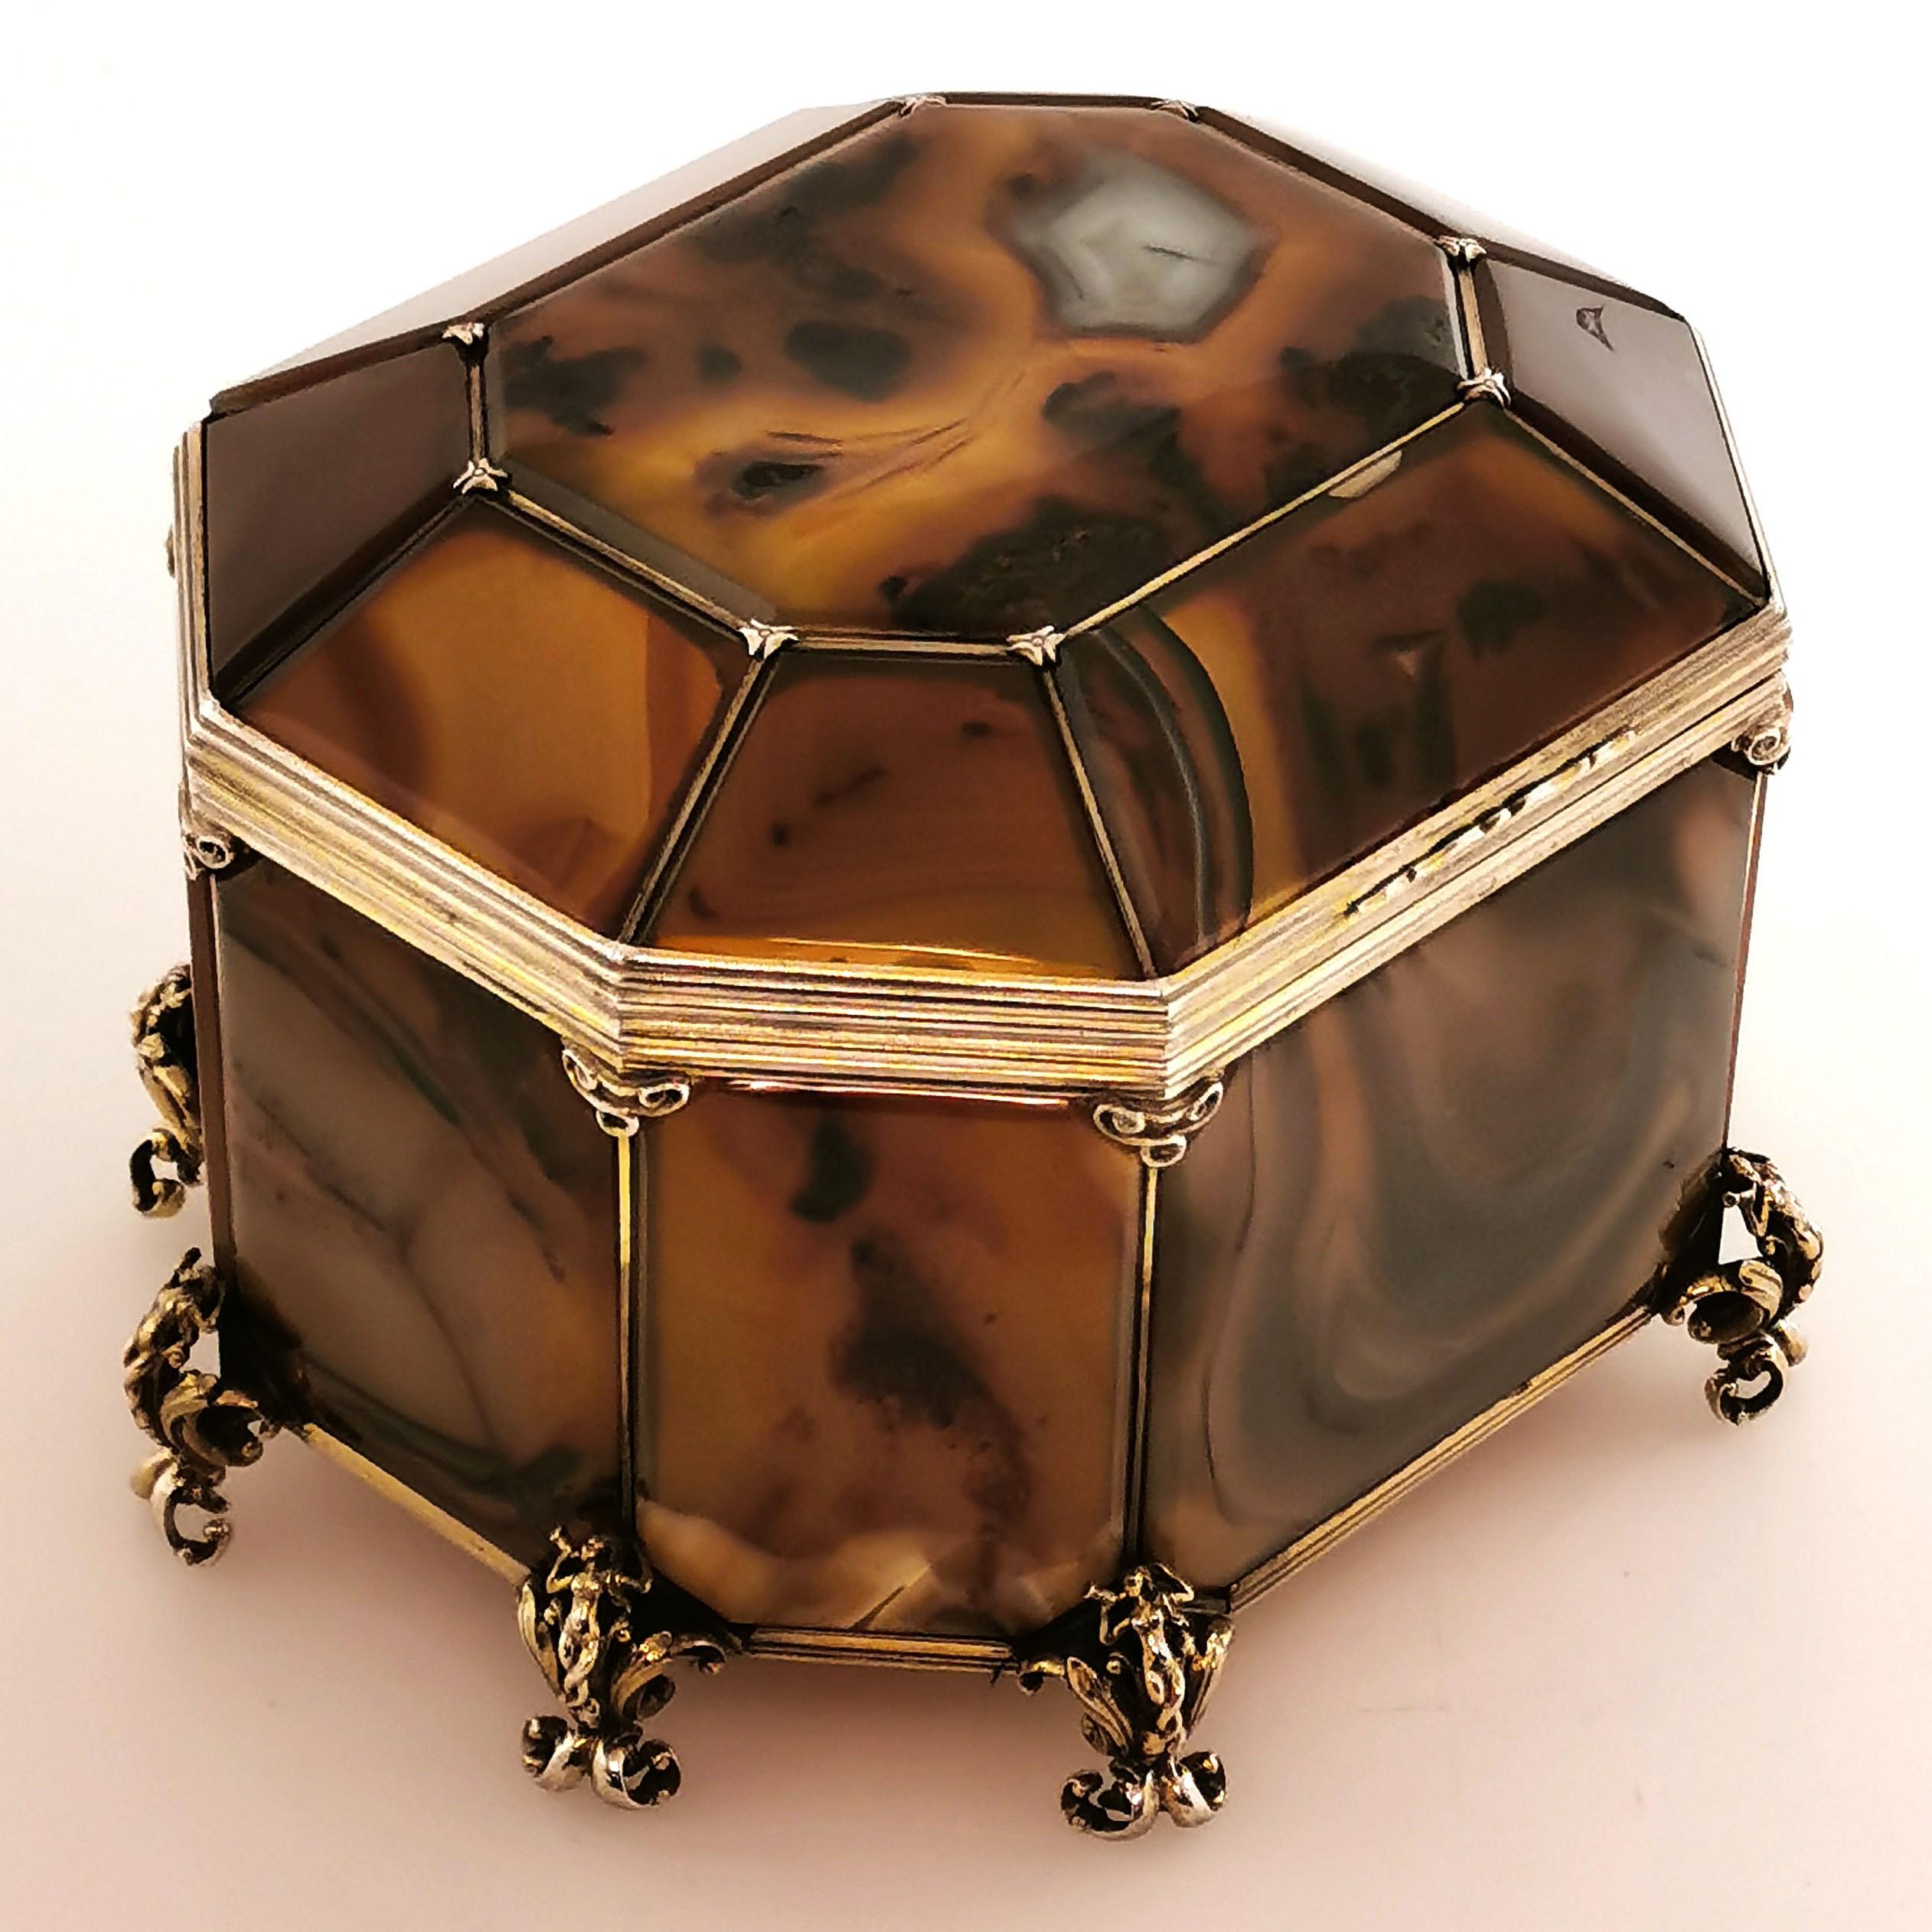 A gorgeous Antique Austrian Moss Agate and Silver Gilt Casket. This Box has a faceted octagonal shape as the panels of agate are mounted in an elegant silver gilt frame. The Casket stands on 8 ornate feet featuring a mythical creature blowing on a